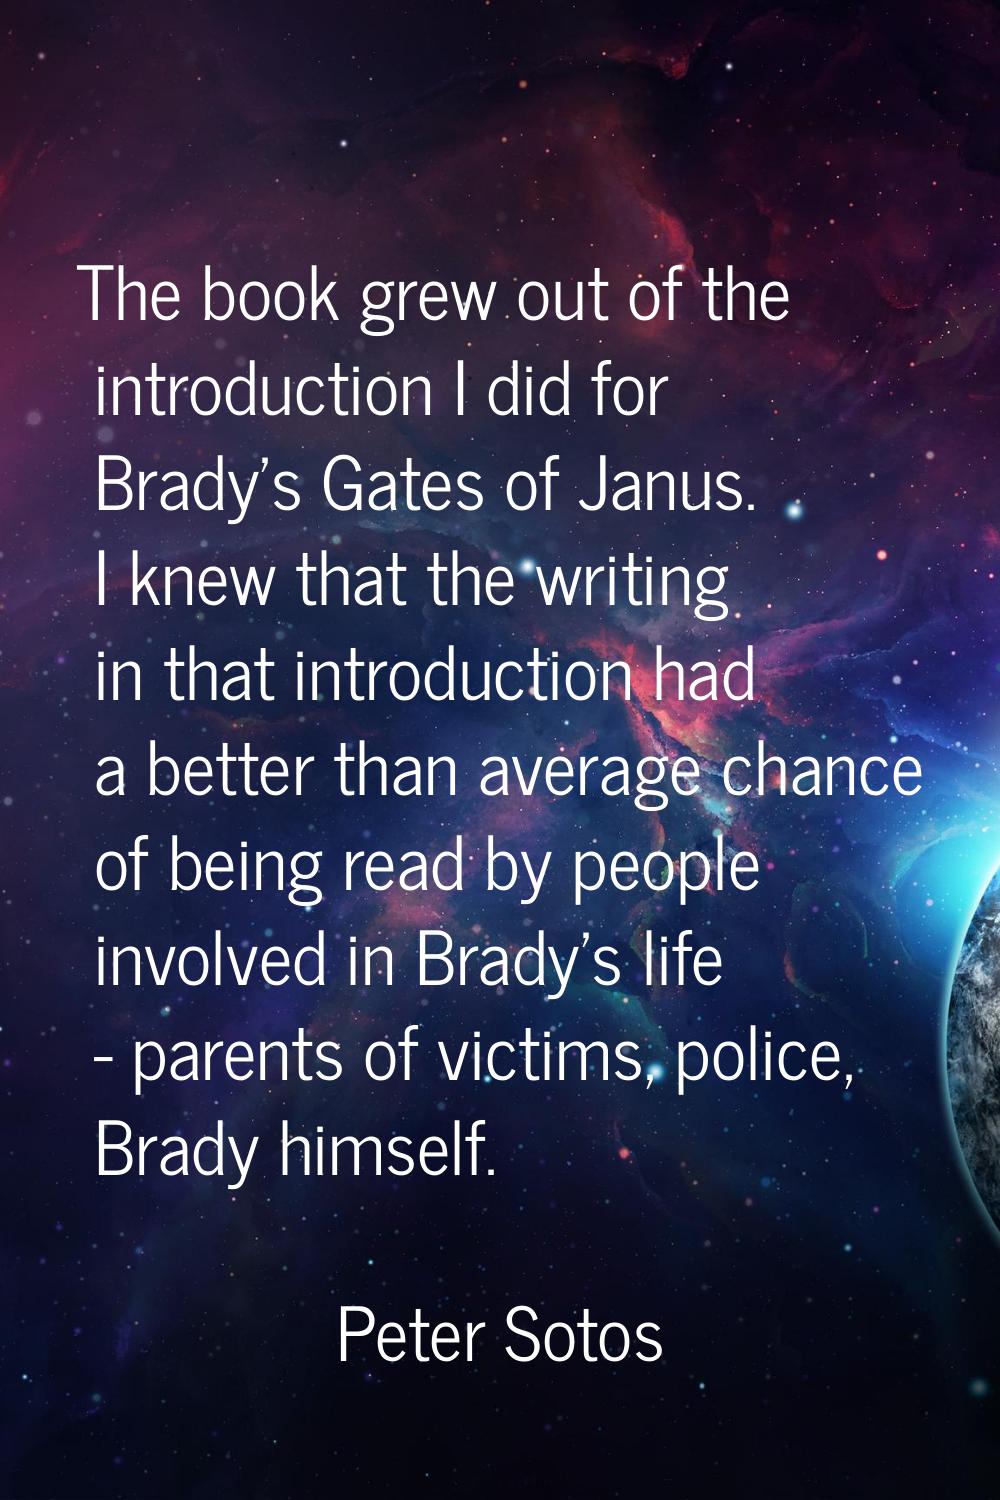 The book grew out of the introduction I did for Brady's Gates of Janus. I knew that the writing in 